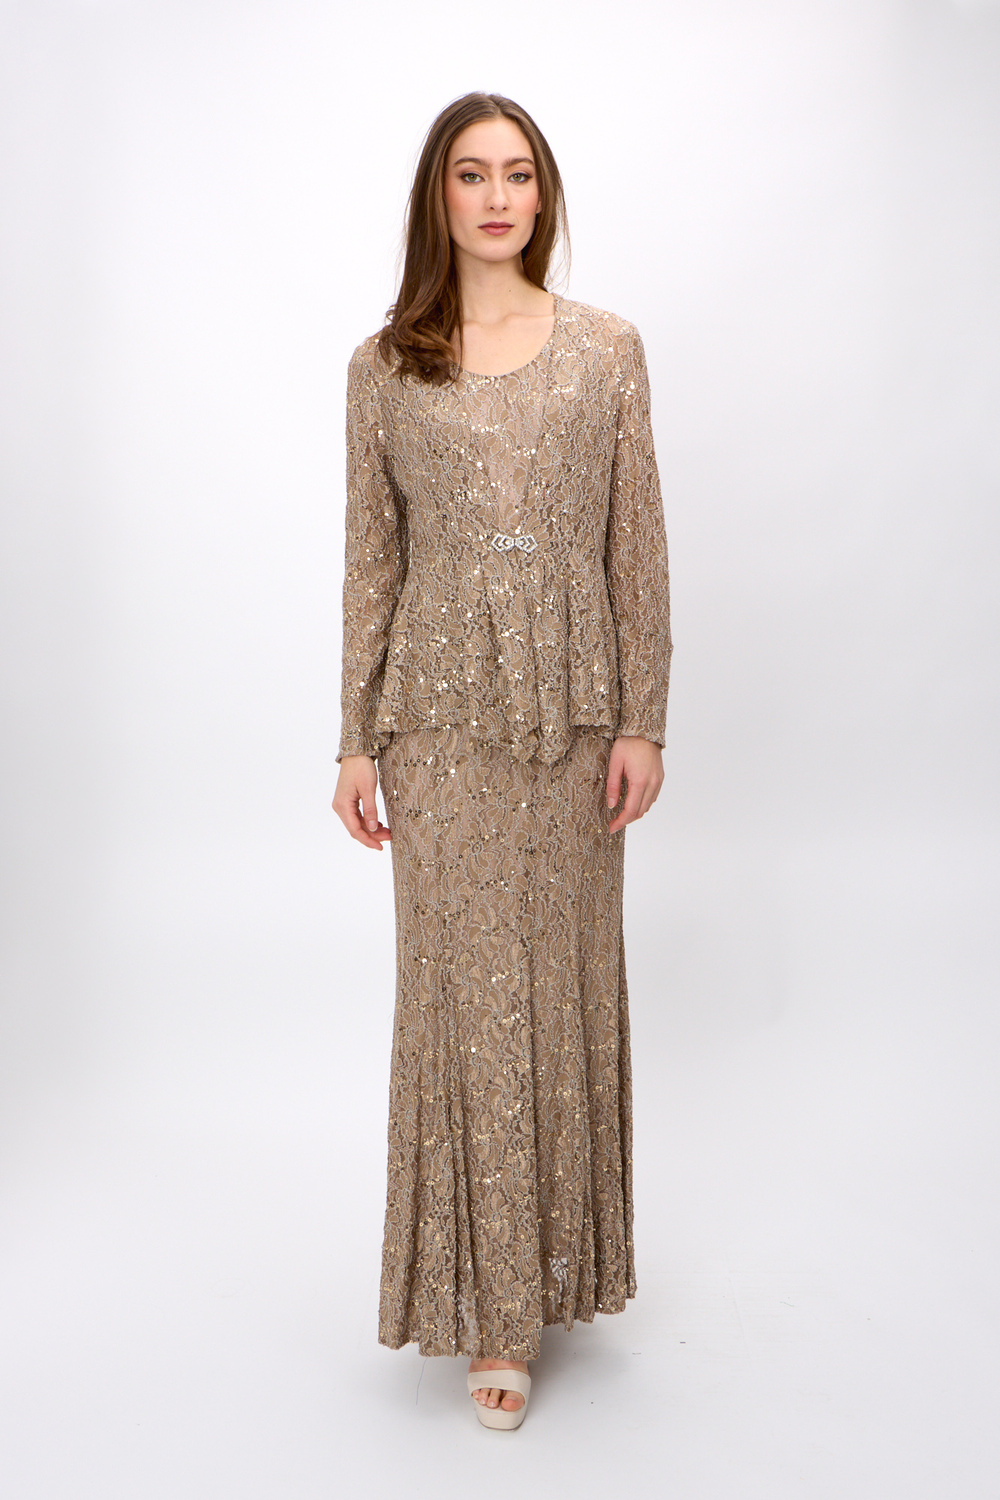 Embellished Lace Gown with Jacket Style 81122452. Champagne